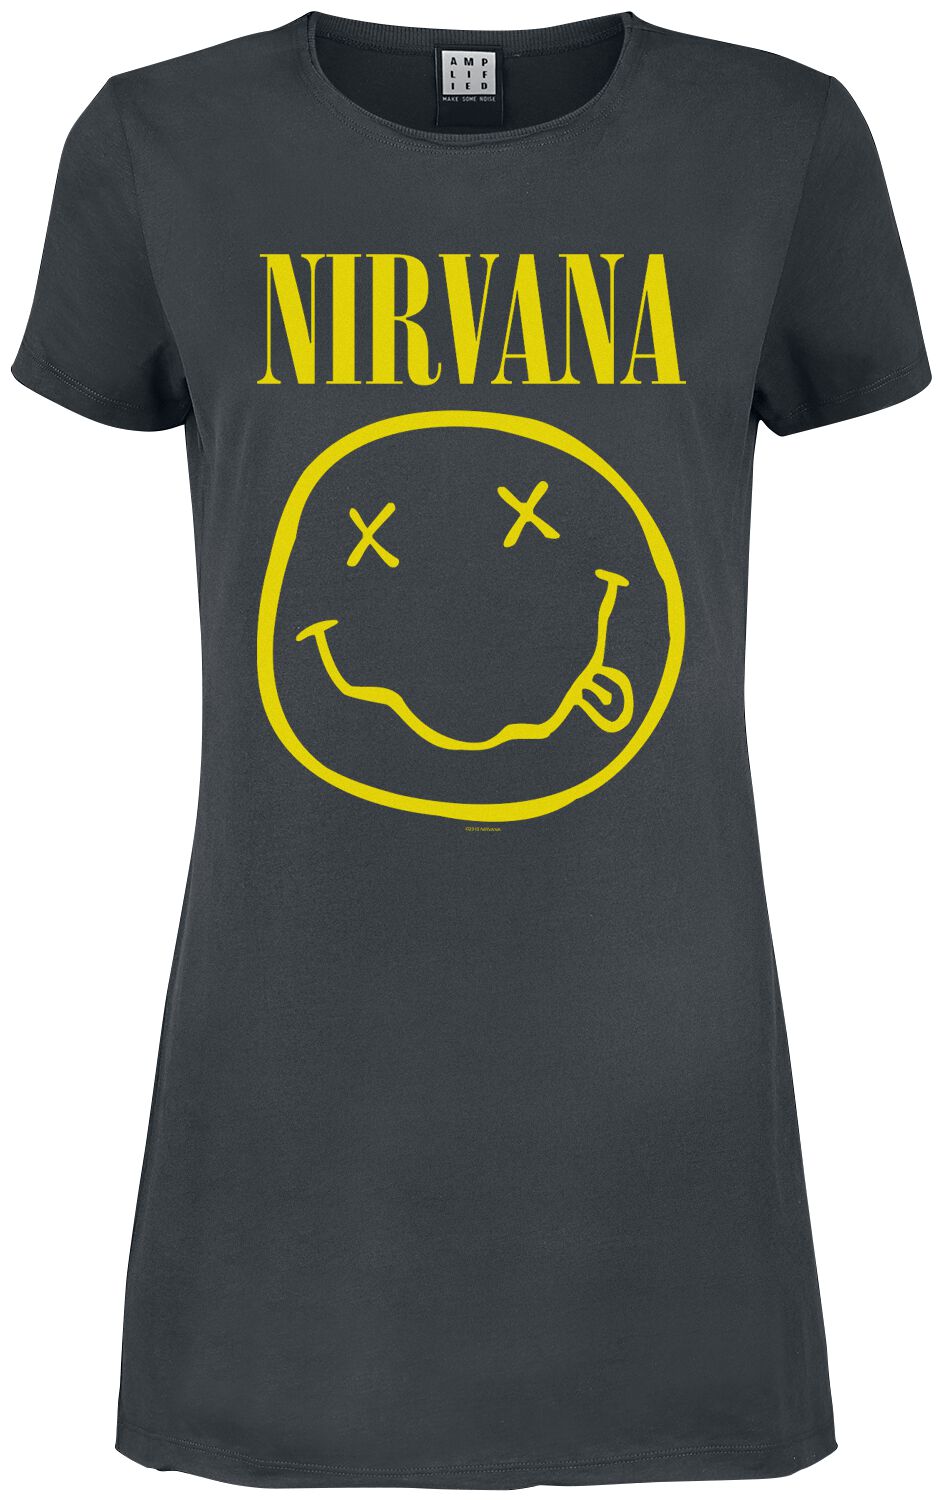 Image of Miniabito di Nirvana - Amplified Collection - Smiley - S a XXL - Donna - carbone